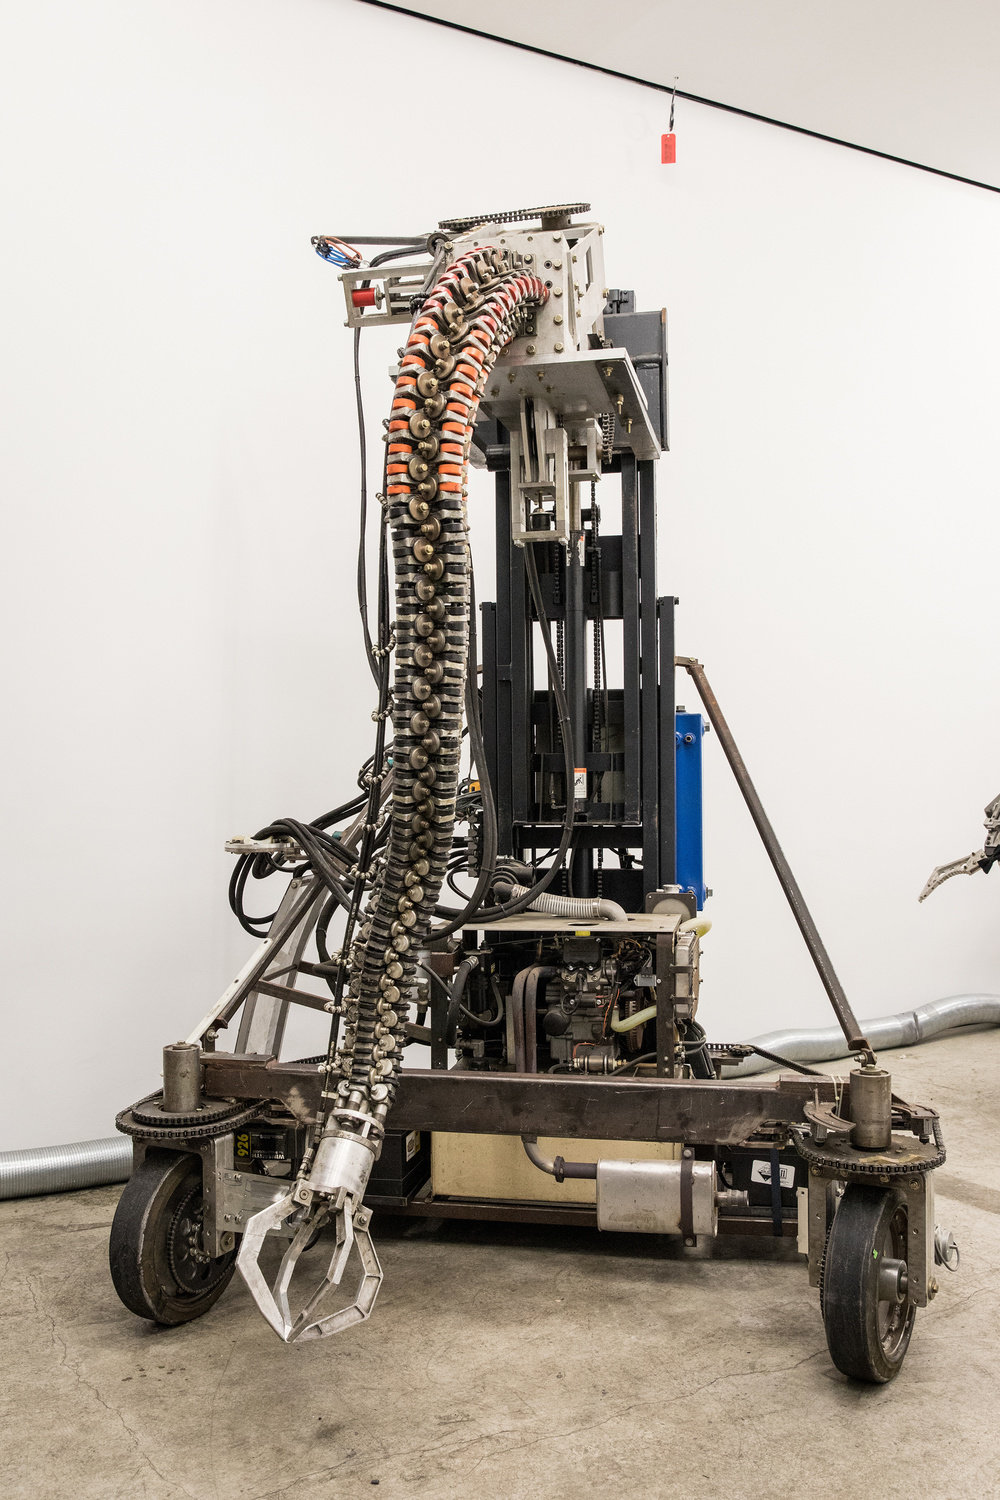 Srl, spine robot, 2012 2014, steel, aluminum, plastic, dyneema rope, remote control, electric and gas powered, 125 x 125 x 90 in., 317.5 x 317.5 x 228.6 cm, cnon 59.717 walter wlodarczyk